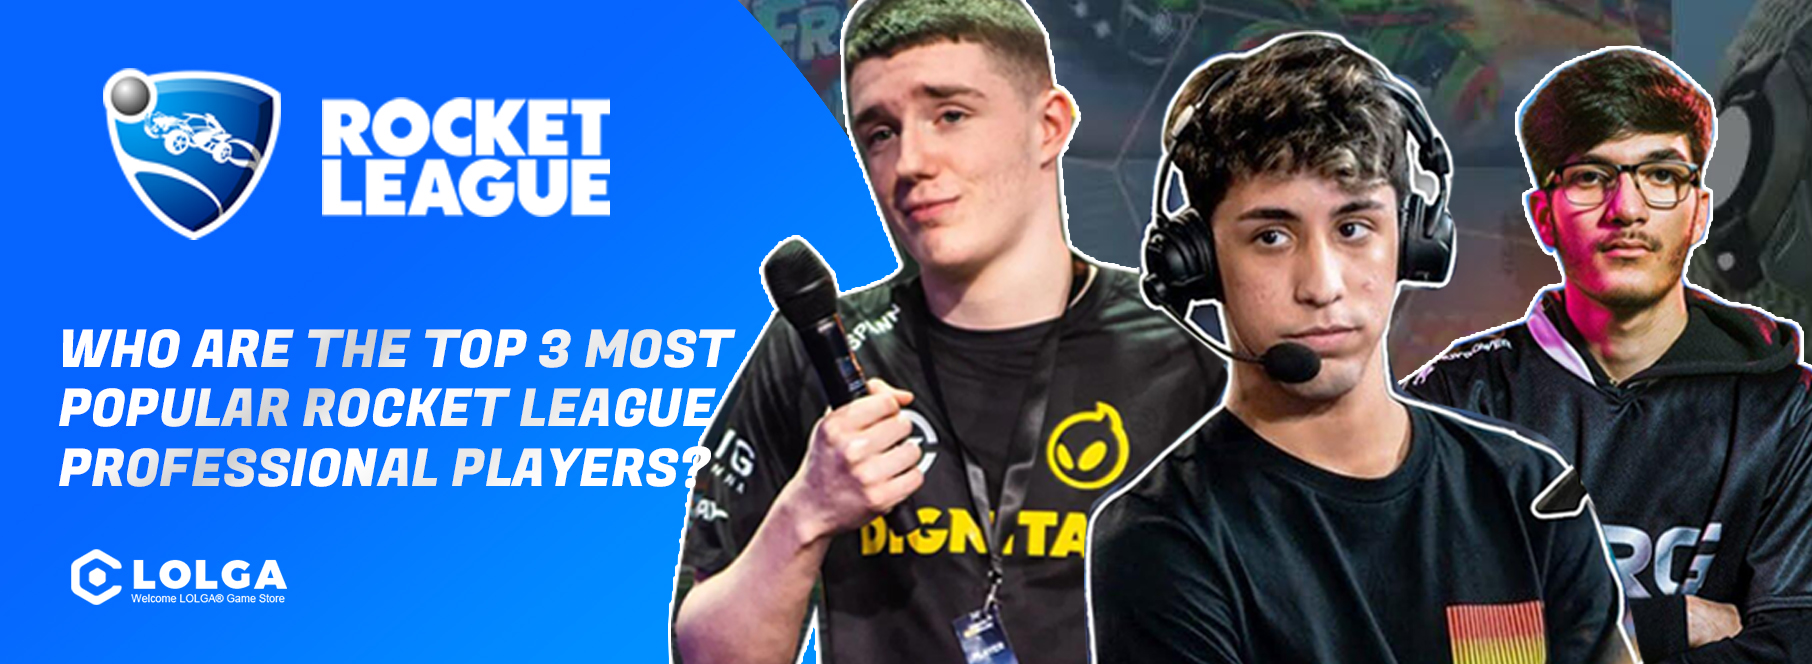  Who are the Top 3 Most Popular Rocket League Professional Players? 